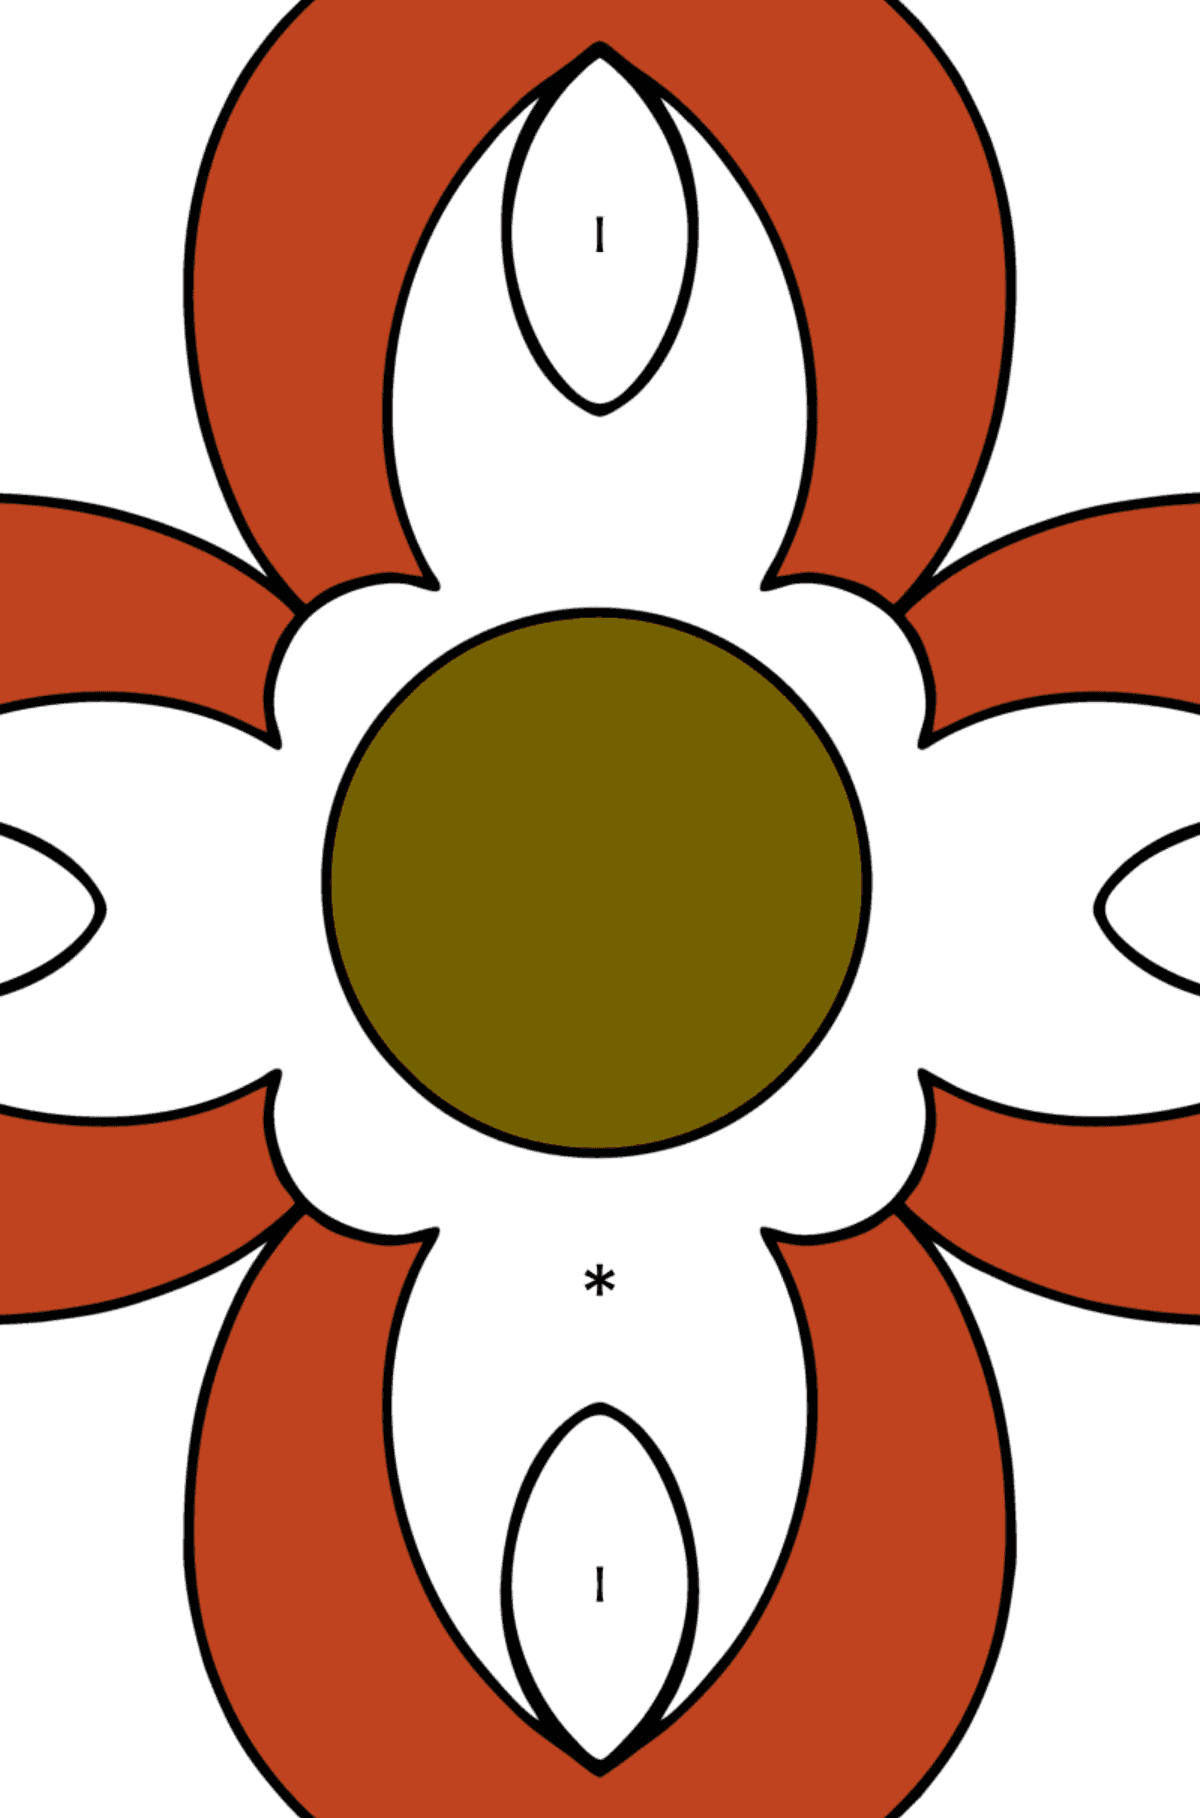 Coloring book for kids - Anti stress flower - Coloring by Symbols for Kids